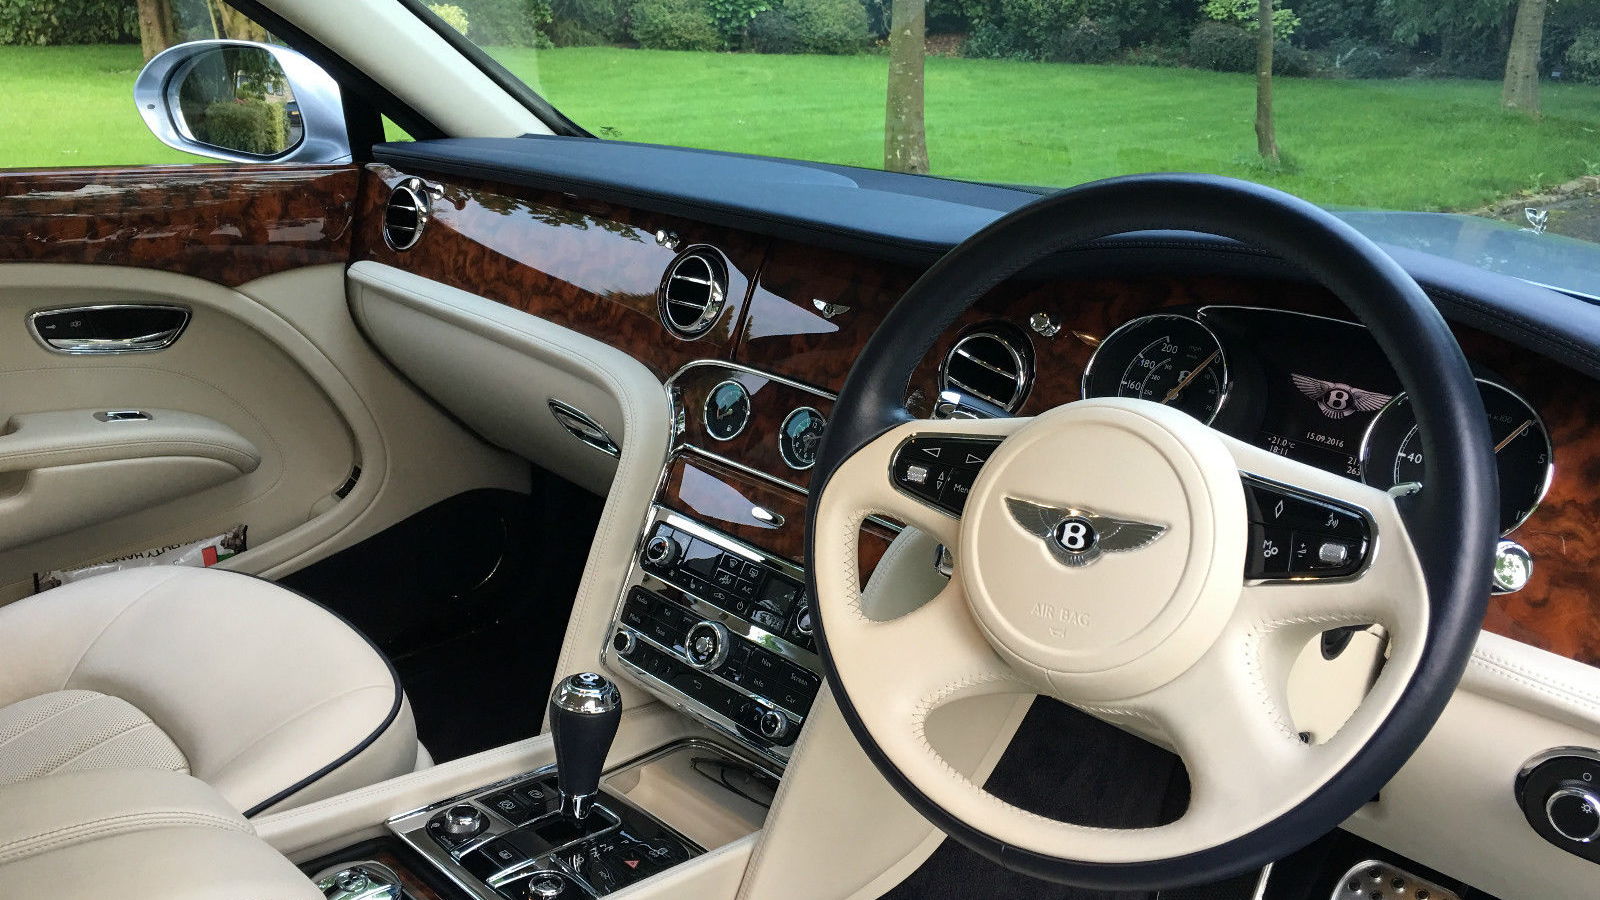 Lister CEO is selling his Bentley Mulsanne